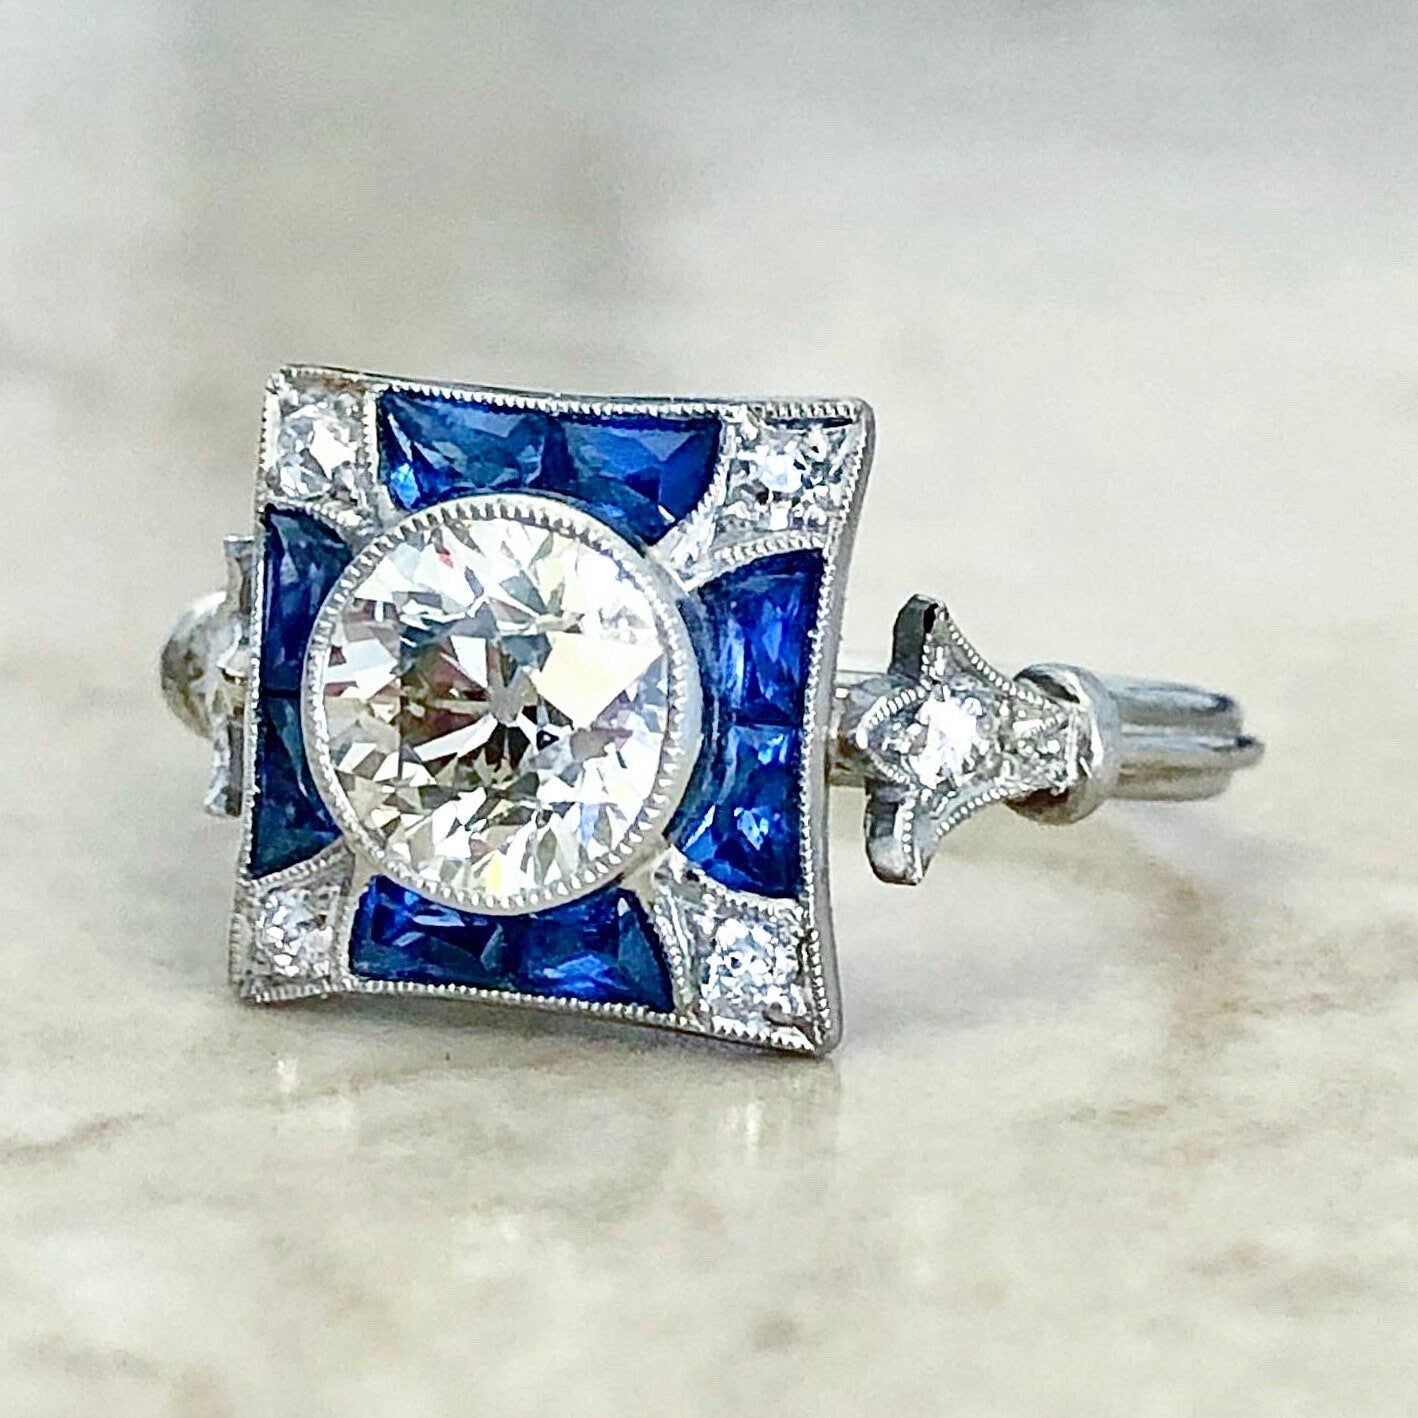 Very Fine Handcrafted Platinum Art Deco Style Diamond & Sapphire Engagement Ring - Cocktail Ring - Promise Ring - Maltese Cross Ring